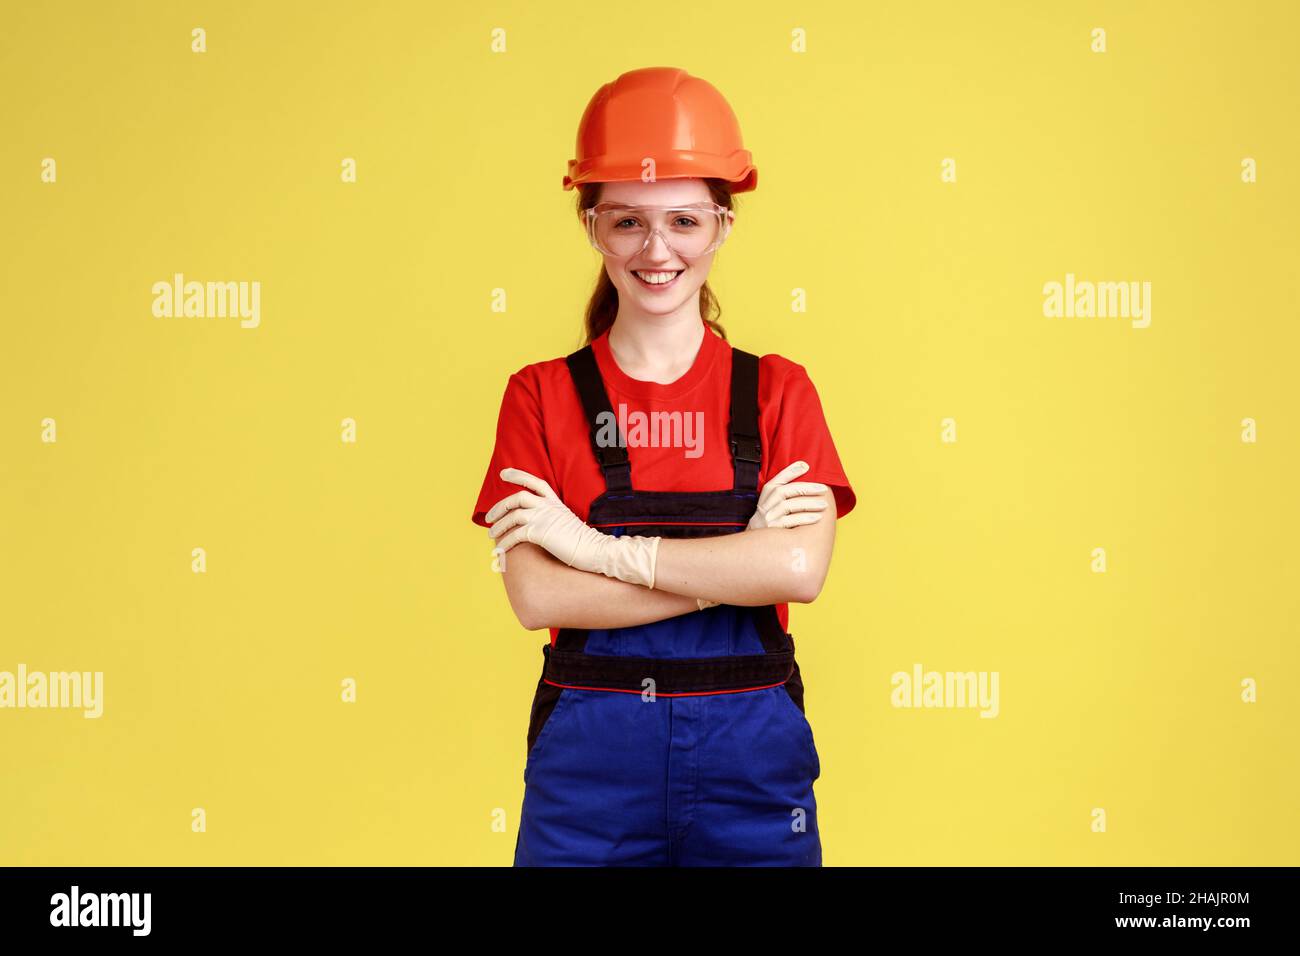 Portrait of positive worker woman standing with crossed arms and looking at camera with confident expression, wearing overalls and helmet. Indoor studio shot isolated on yellow background. Stock Photo